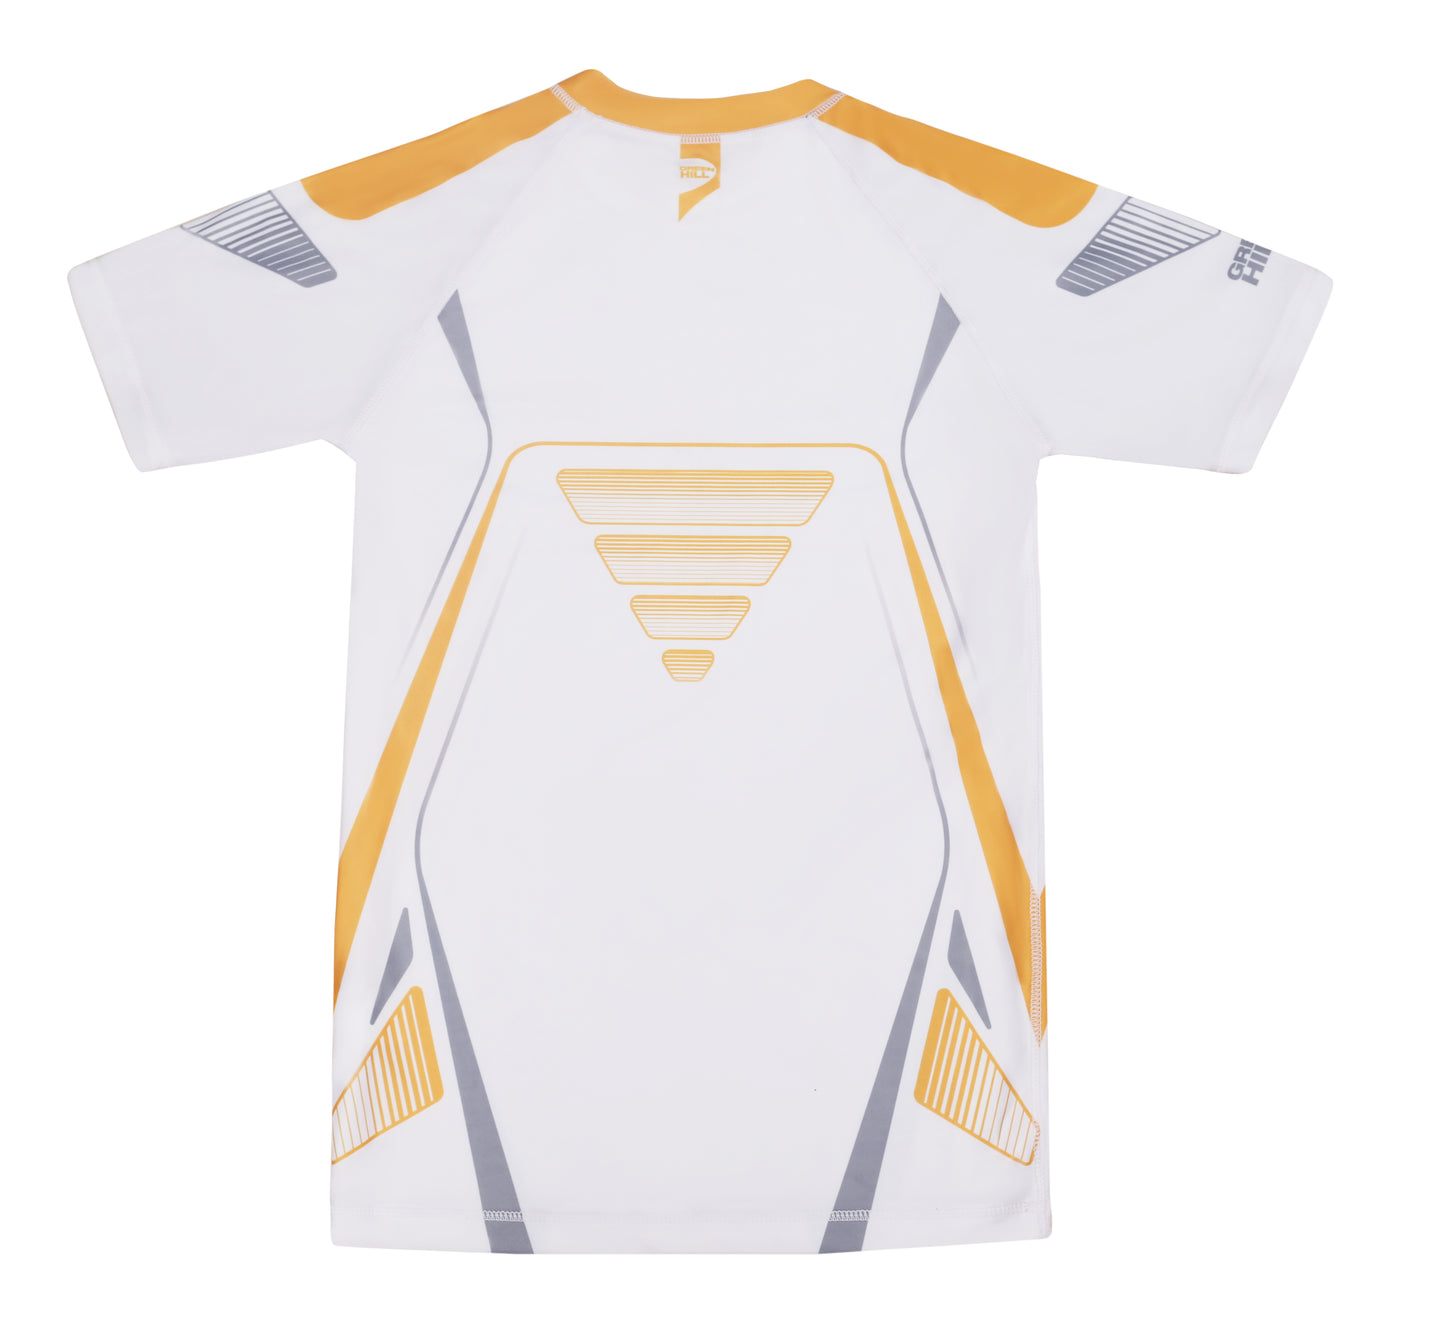 Green Hill IMMAF Approved Rash Guard White 2023